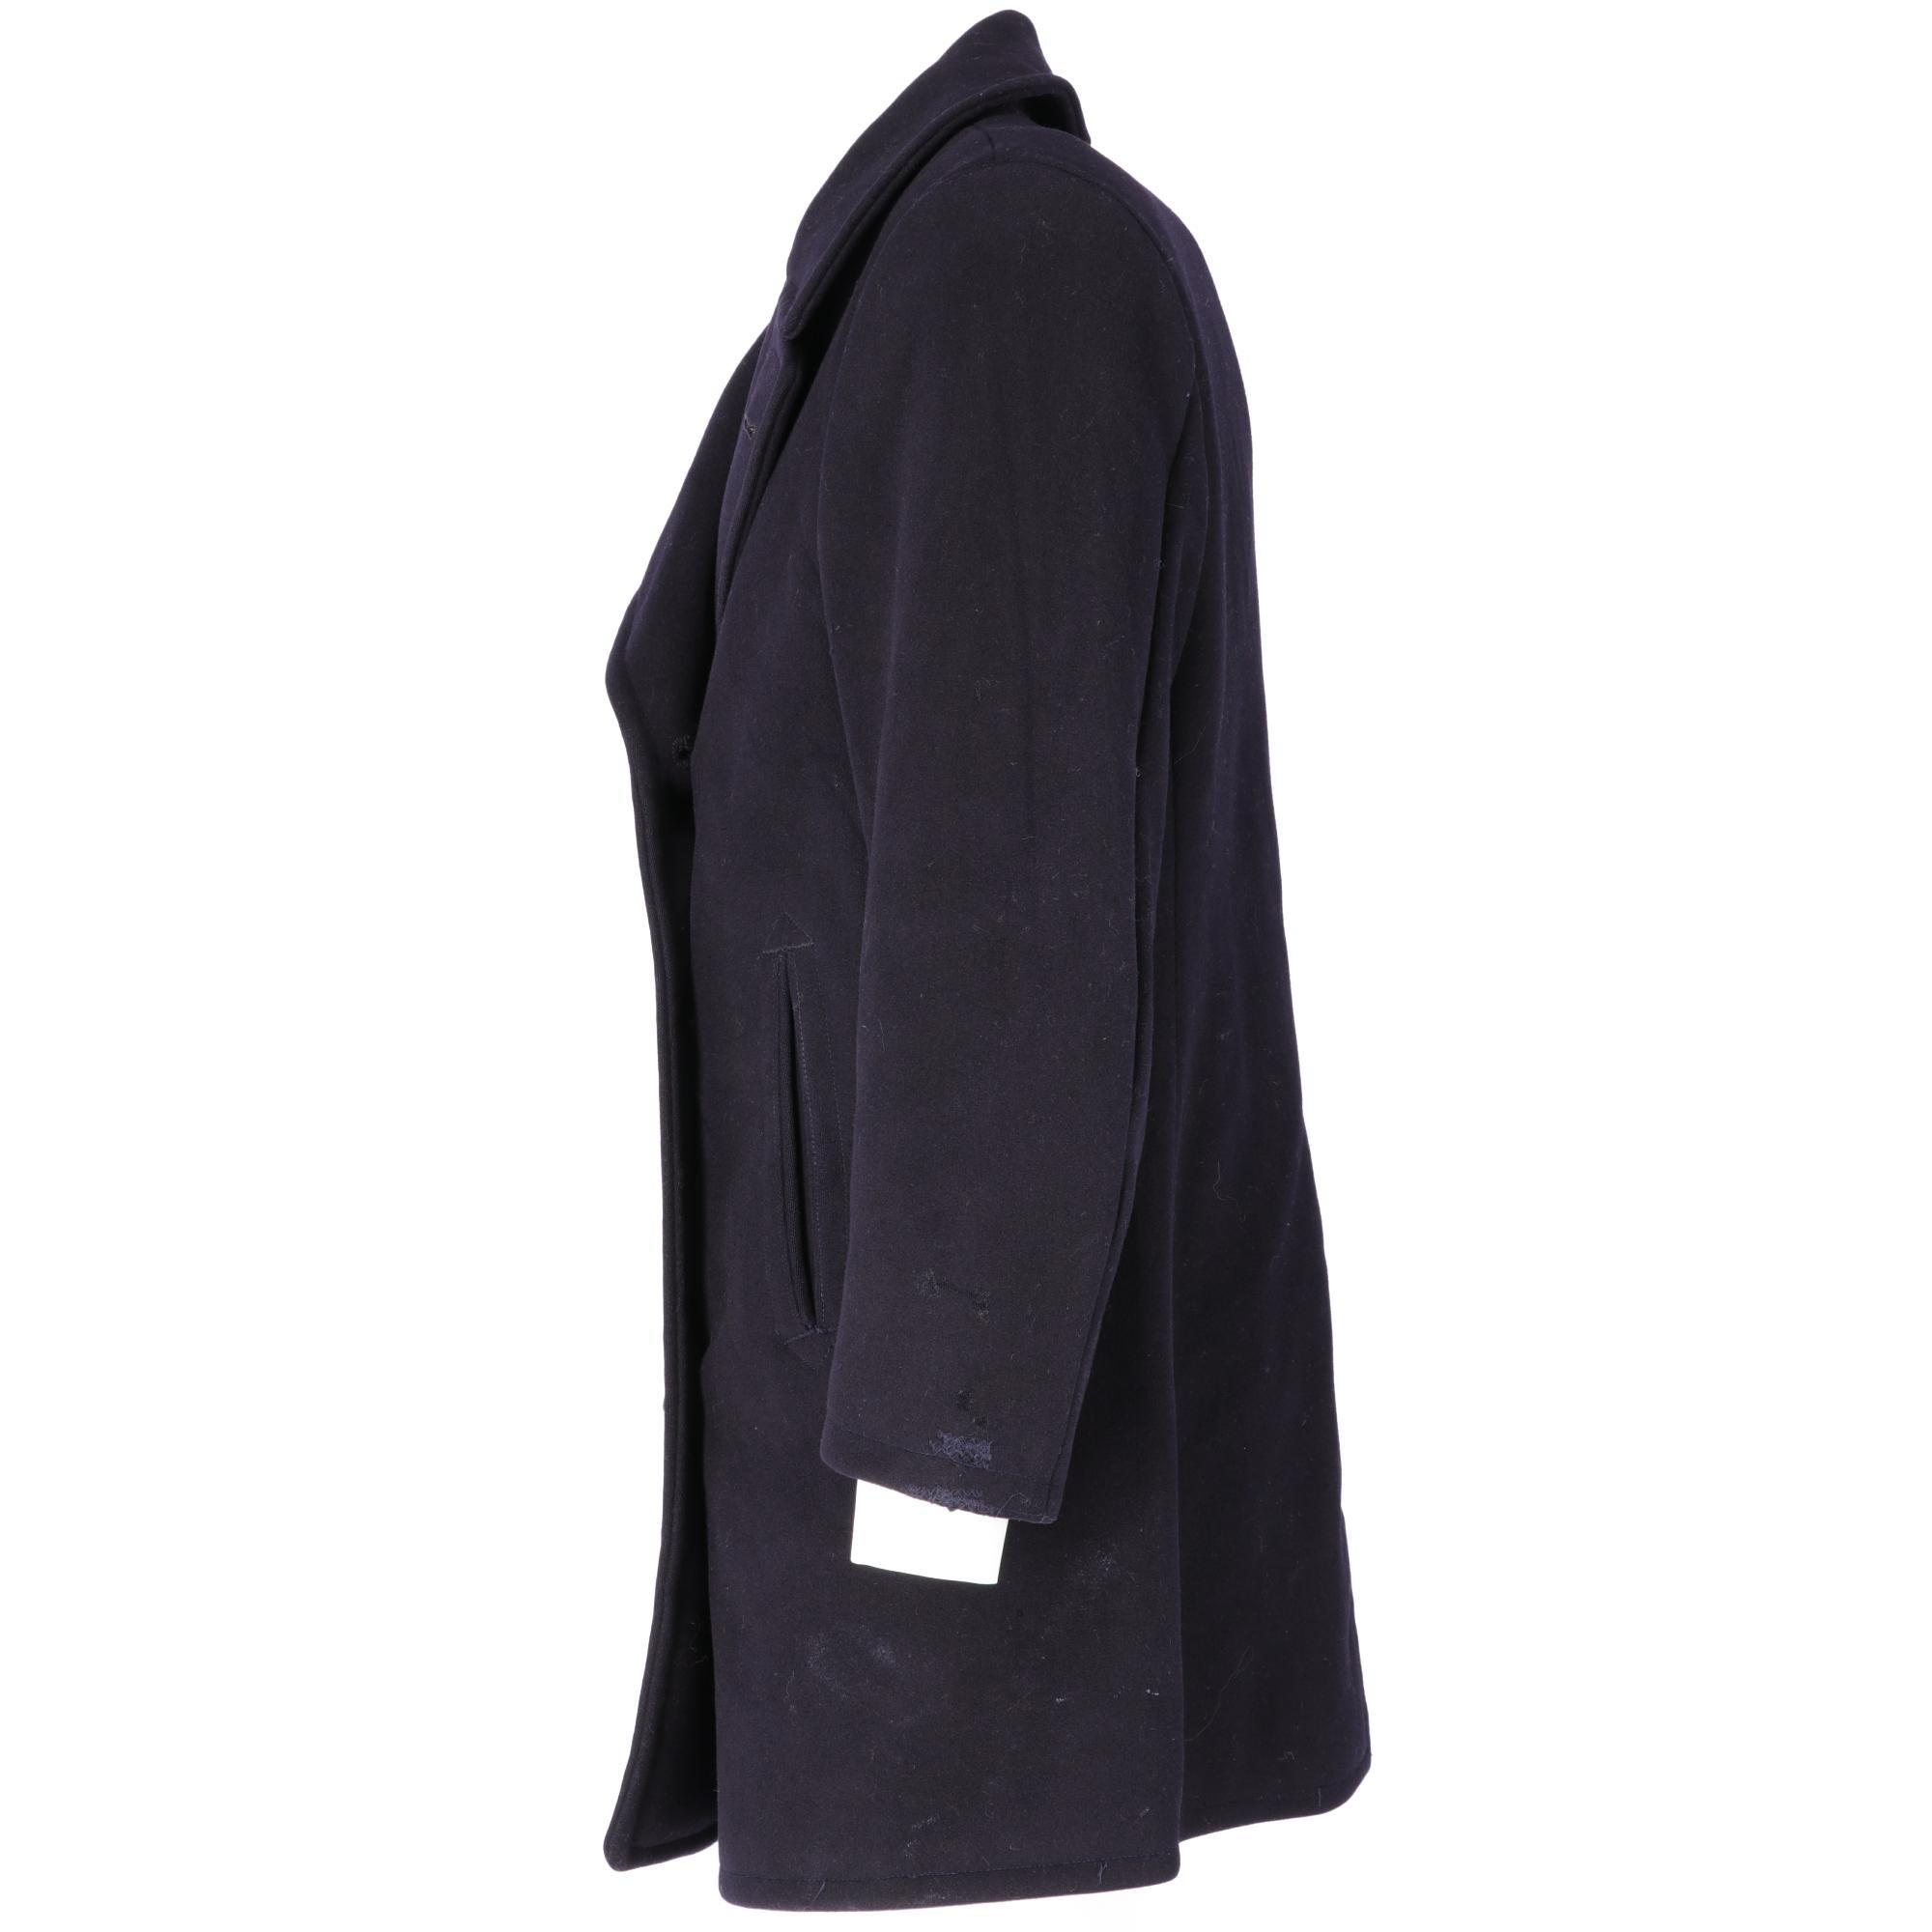 Dark blue wool coat with classic lapels collar, long sleeves, double-breasted button closure with buttons with a decorative anchor, two side welt pockets, back slit, lined and inside pockets.

The item shows slight signs of wear on the garment, the